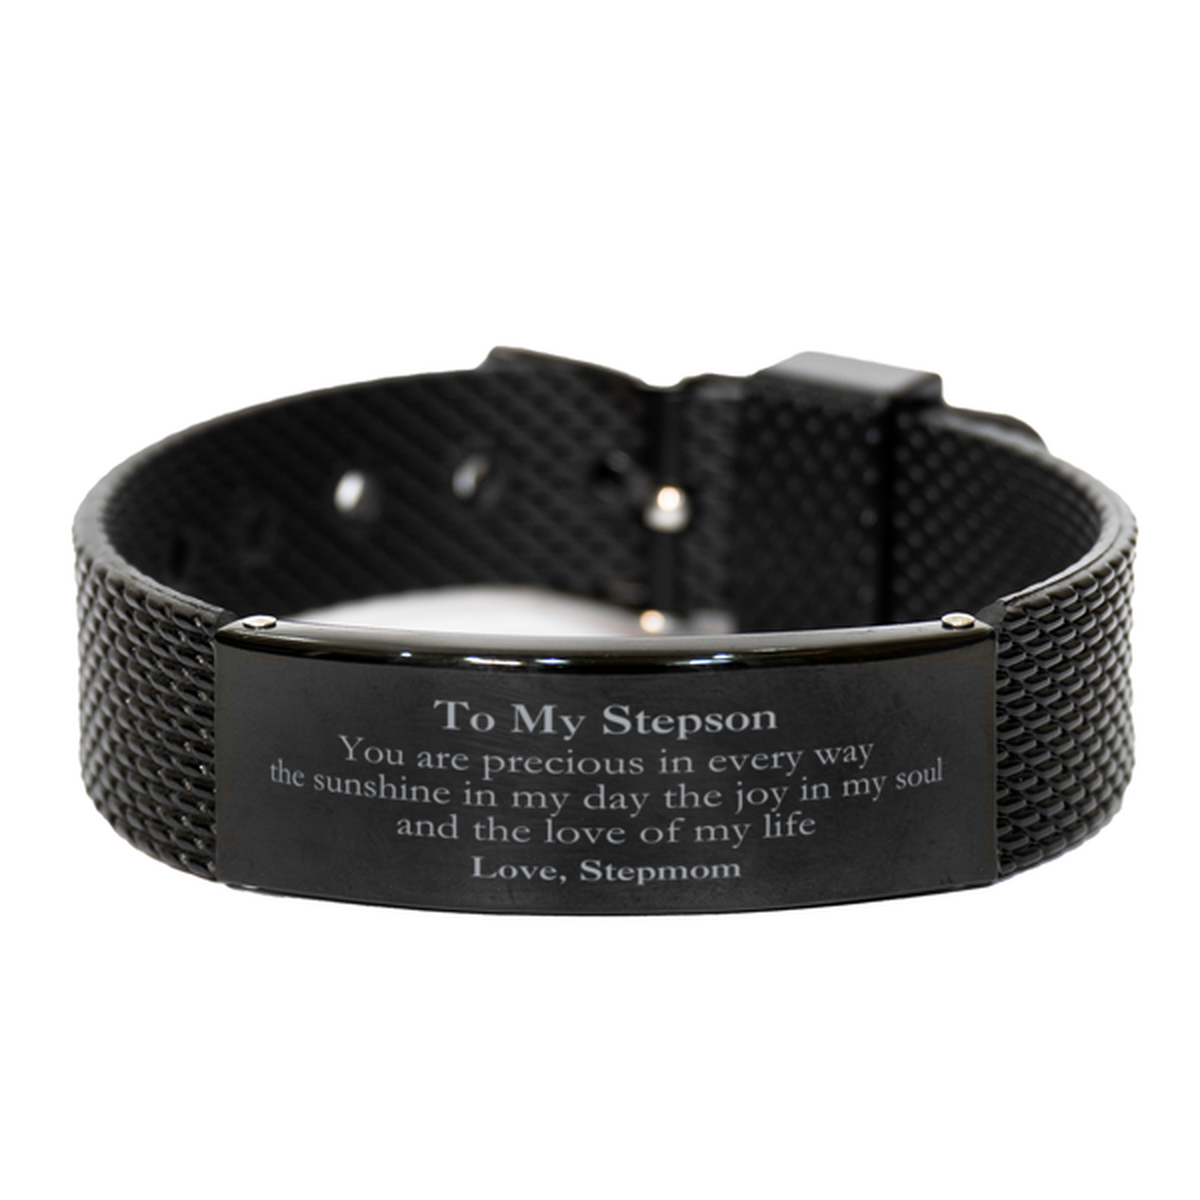 Graduation Gifts for Stepson Black Shark Mesh Bracelet Present from Stepmom, Christmas Stepson Birthday Gifts Stepson You are precious in every way the sunshine in my day. Love, Stepmom